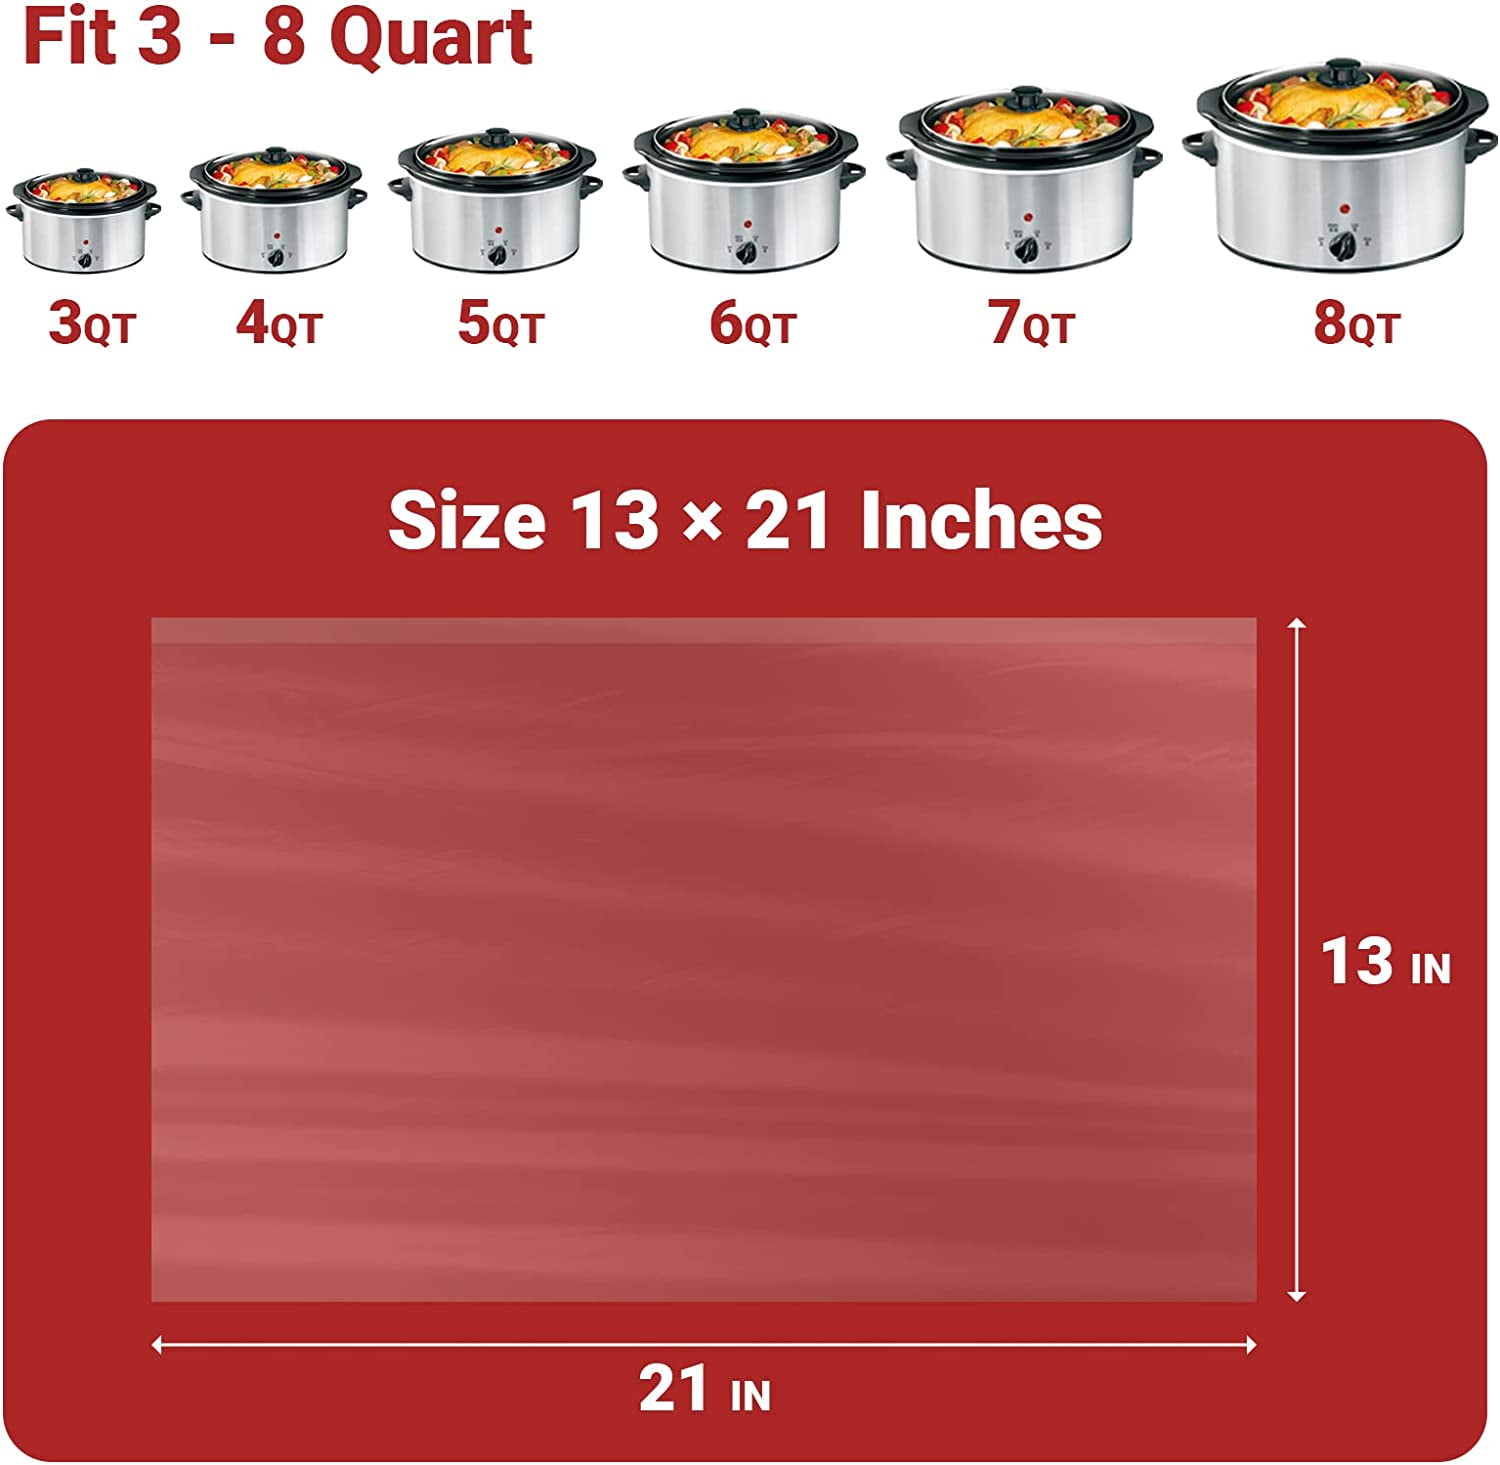 2 Pack McCormick Slow Cooker Liners 8 Pack Fits 3-8 Quart BPA Free